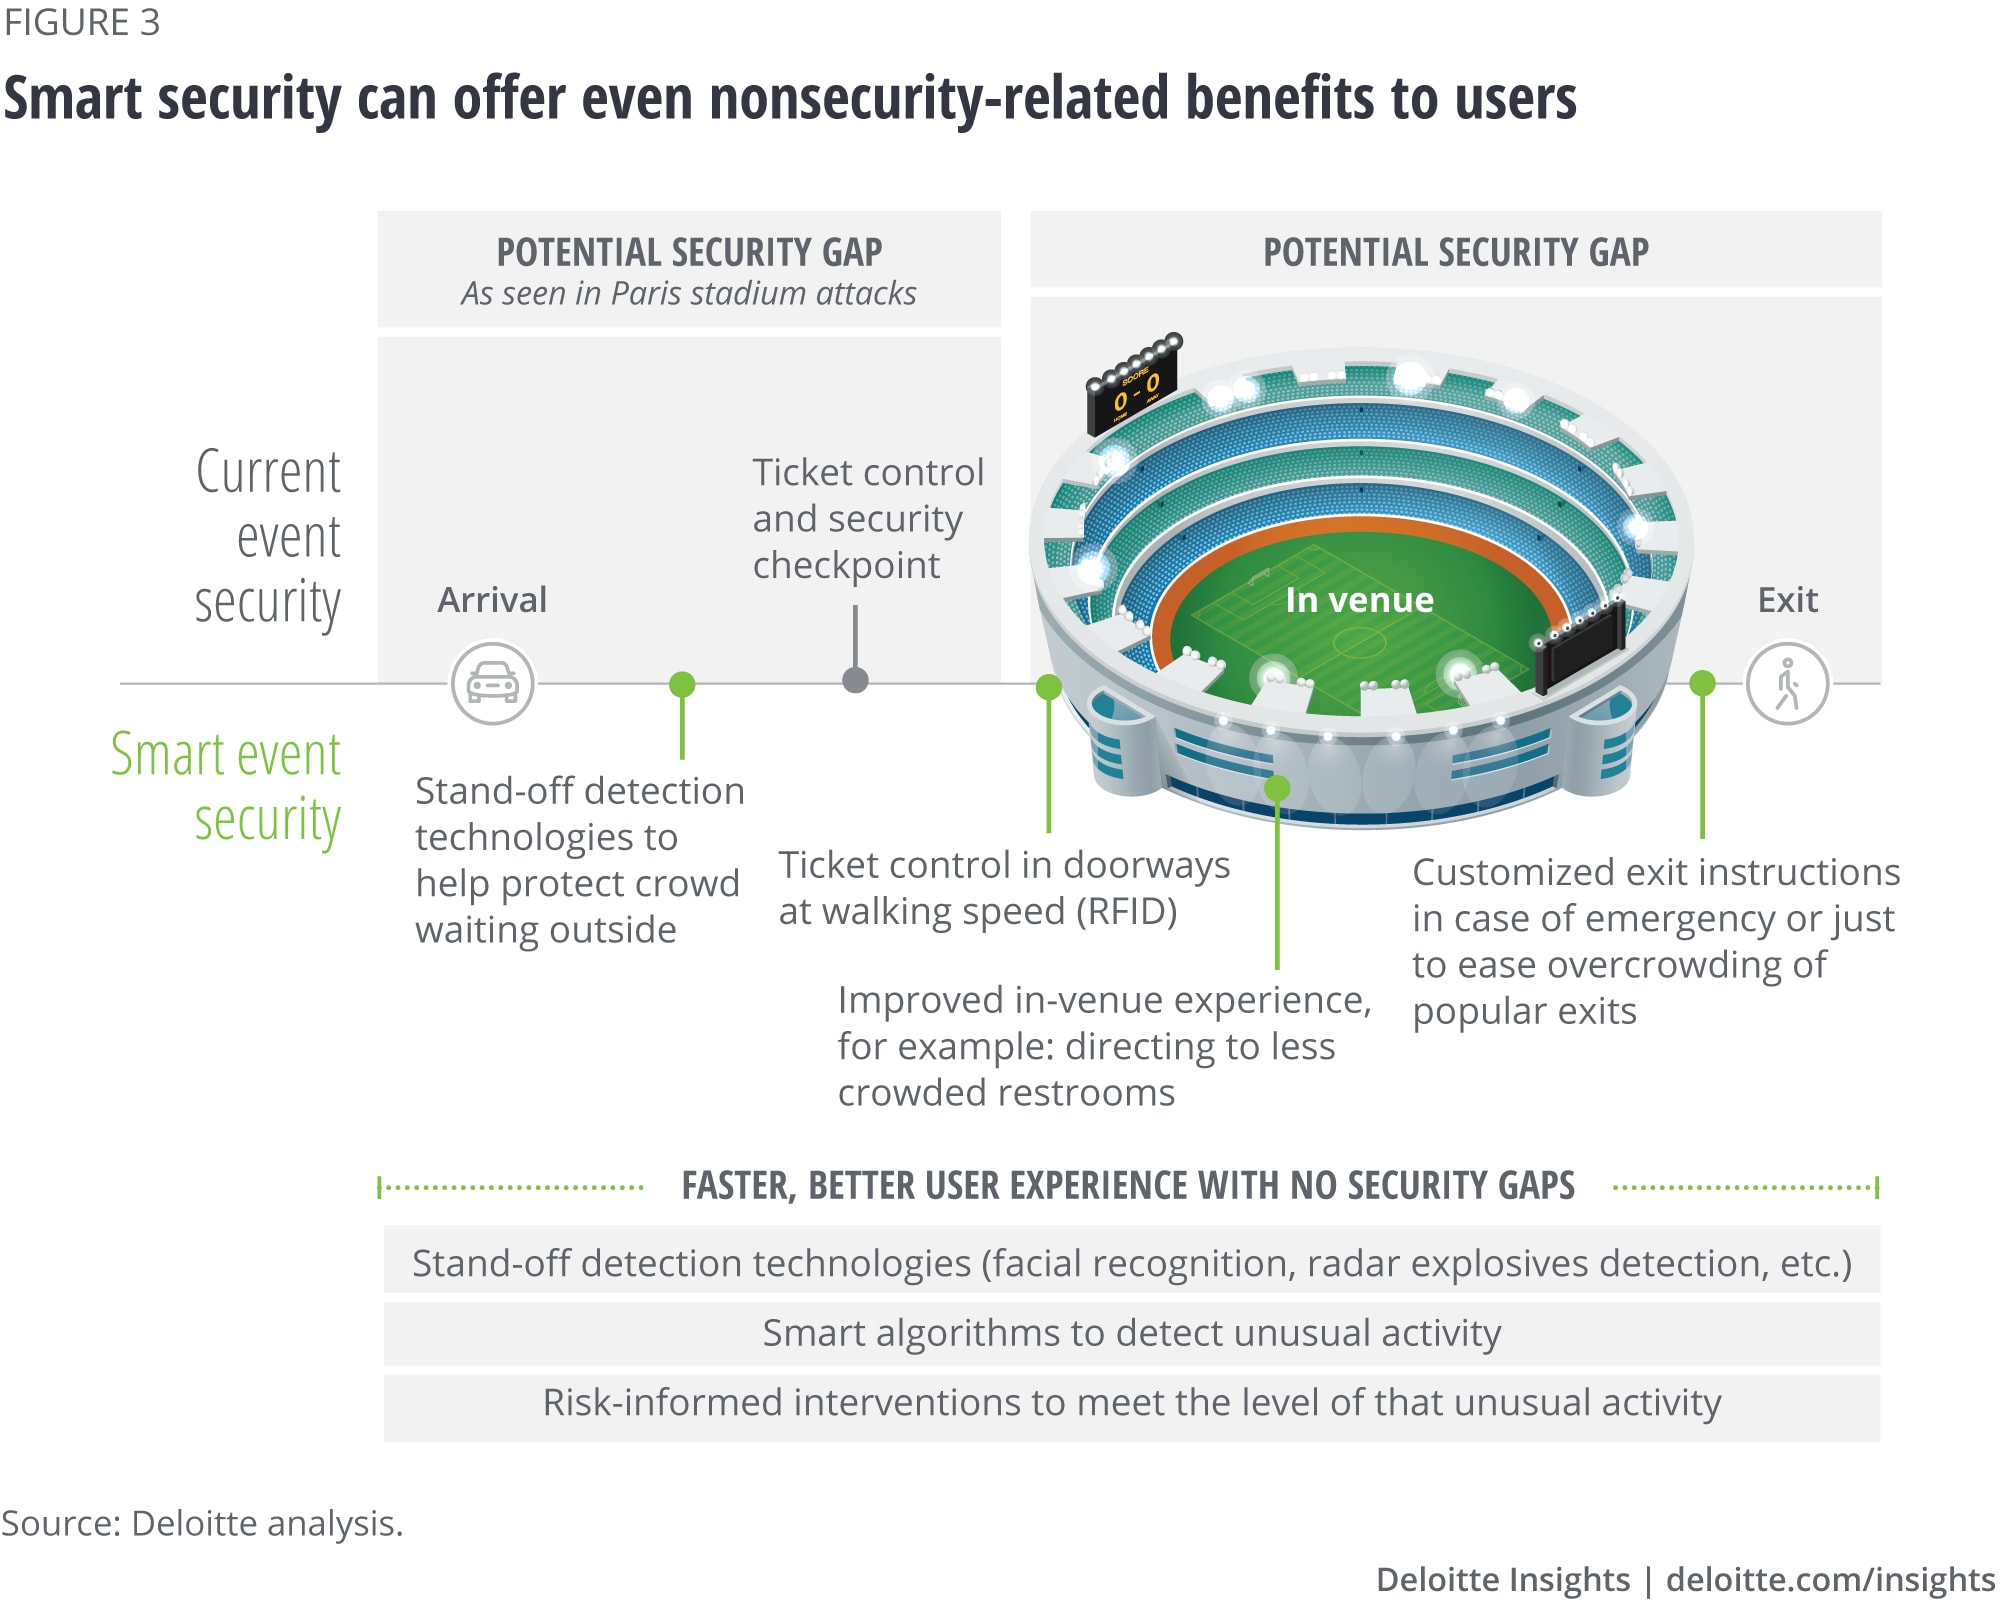 Smart security can offer even nonsecurity-related benefits to users